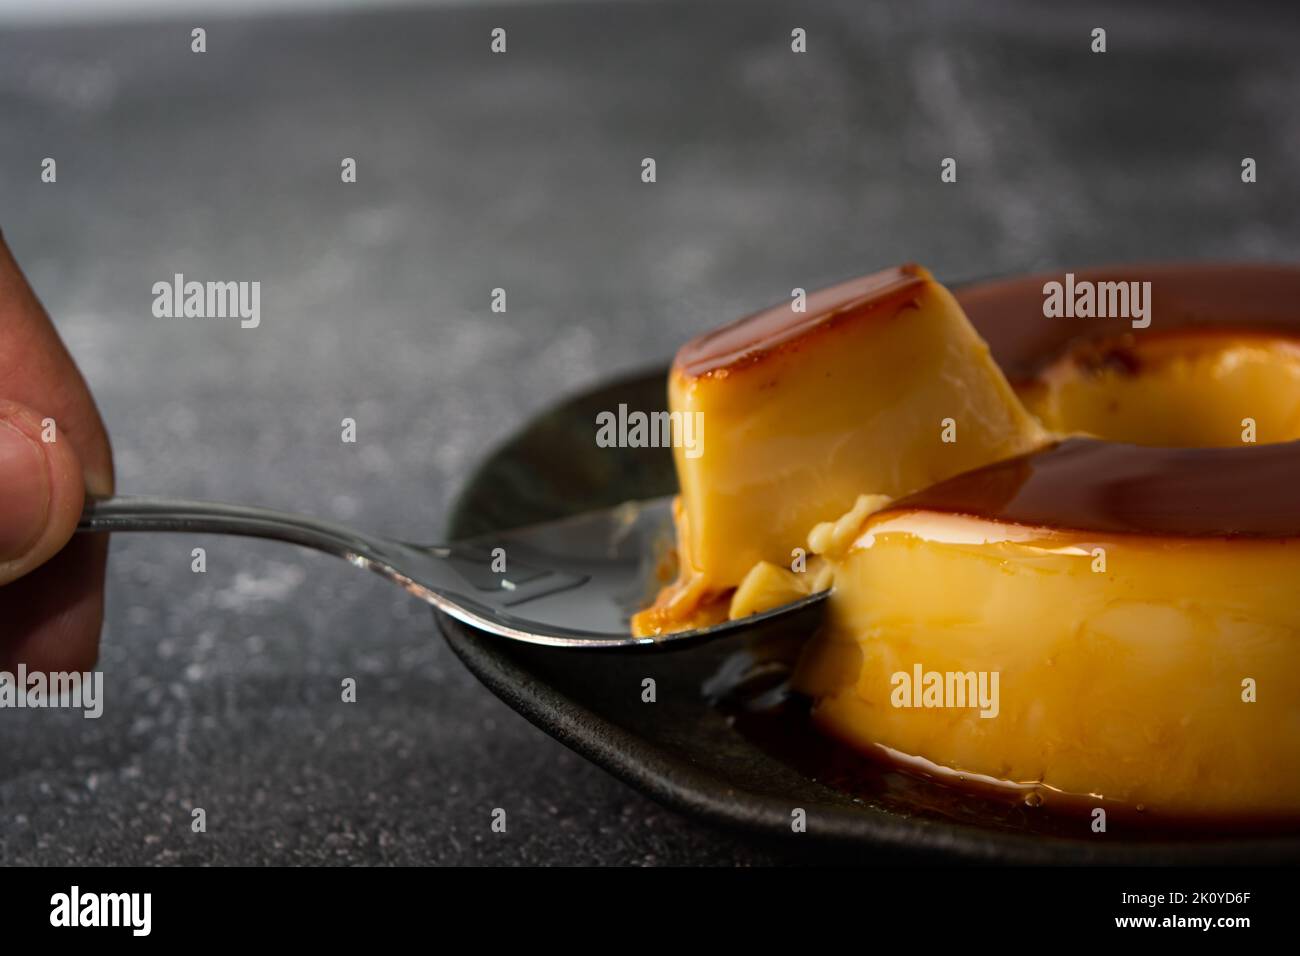 https://c8.alamy.com/comp/2K0YD6F/pudim-de-leite-or-milk-pudding-traditional-brazilian-dessert-with-caramel-also-known-as-flan-high-angle-view-2K0YD6F.jpg